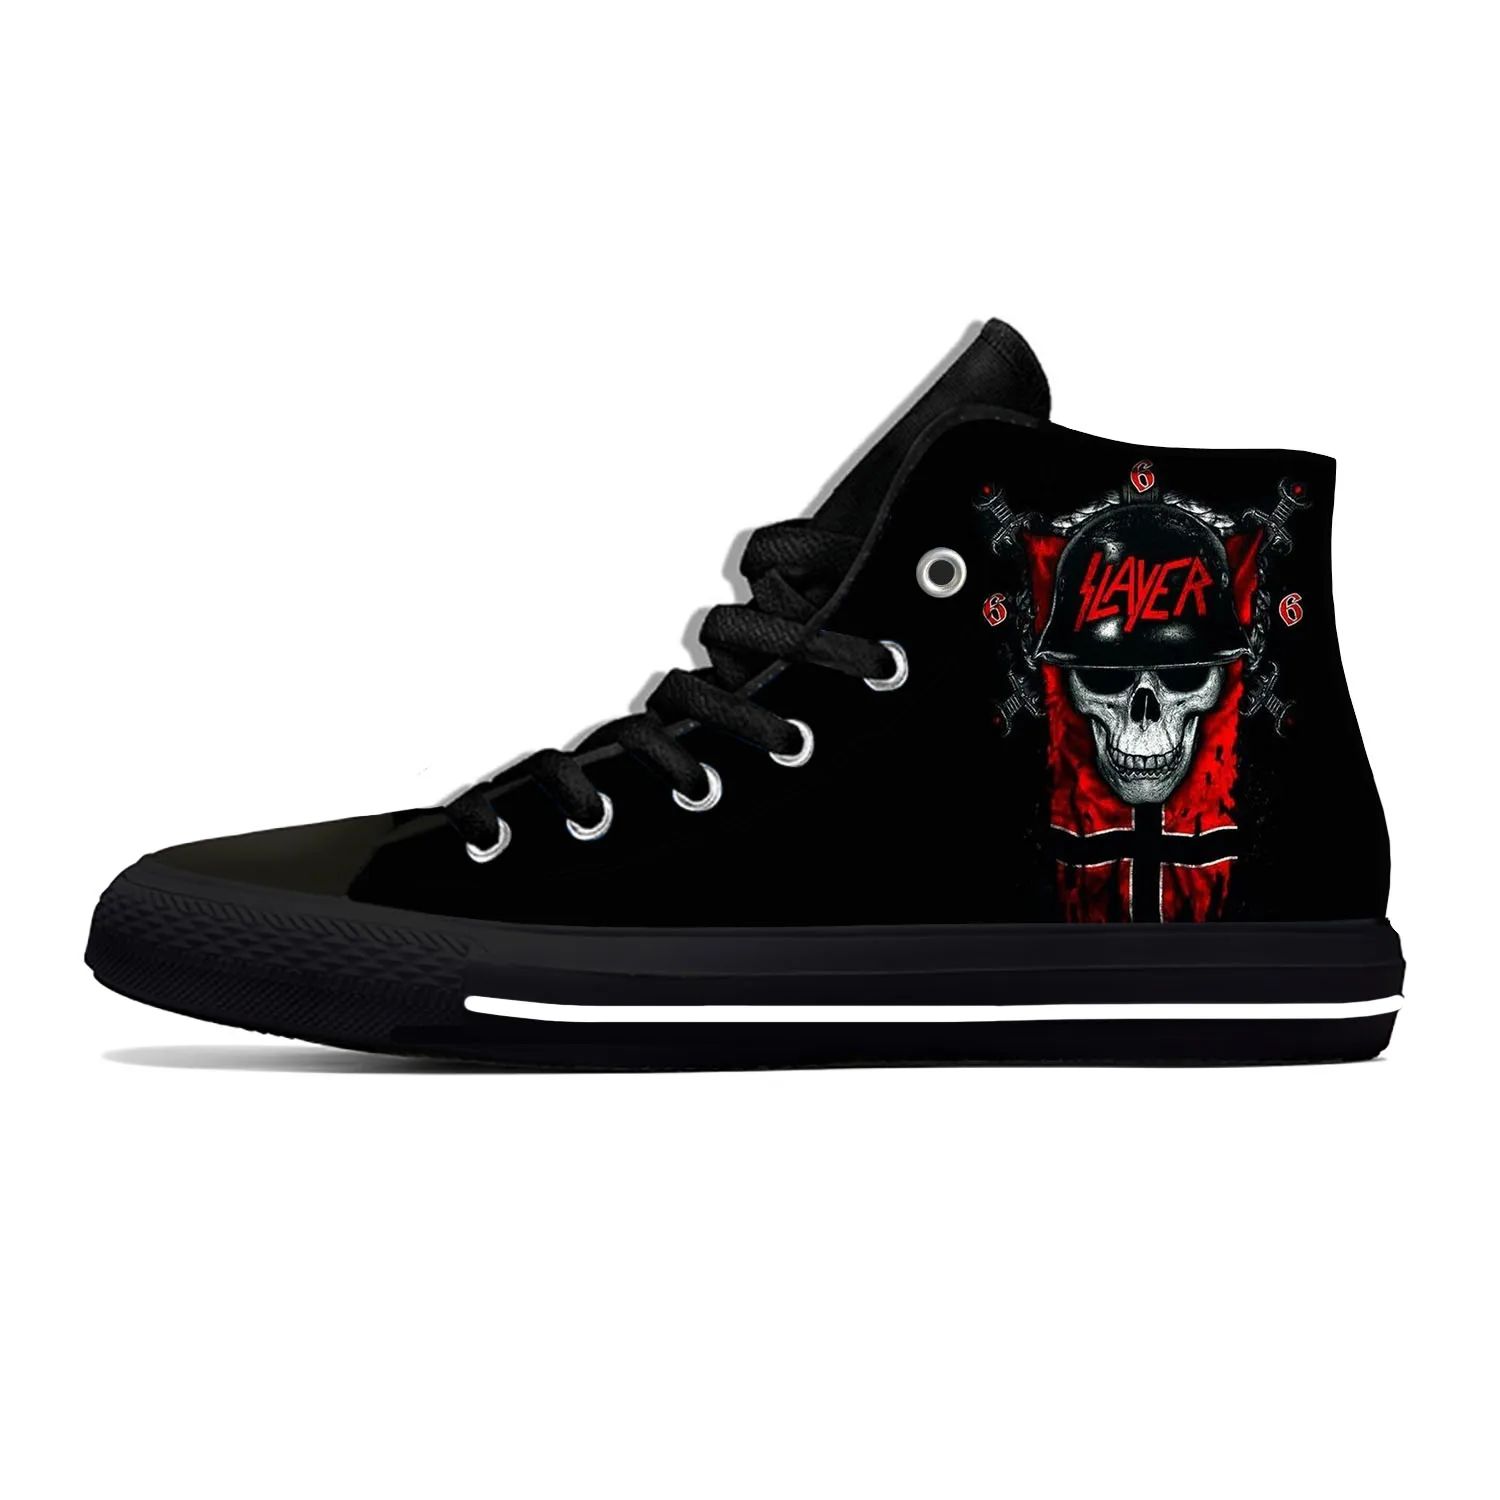 Couleur: Slayer6Shoe Taille: 8.5